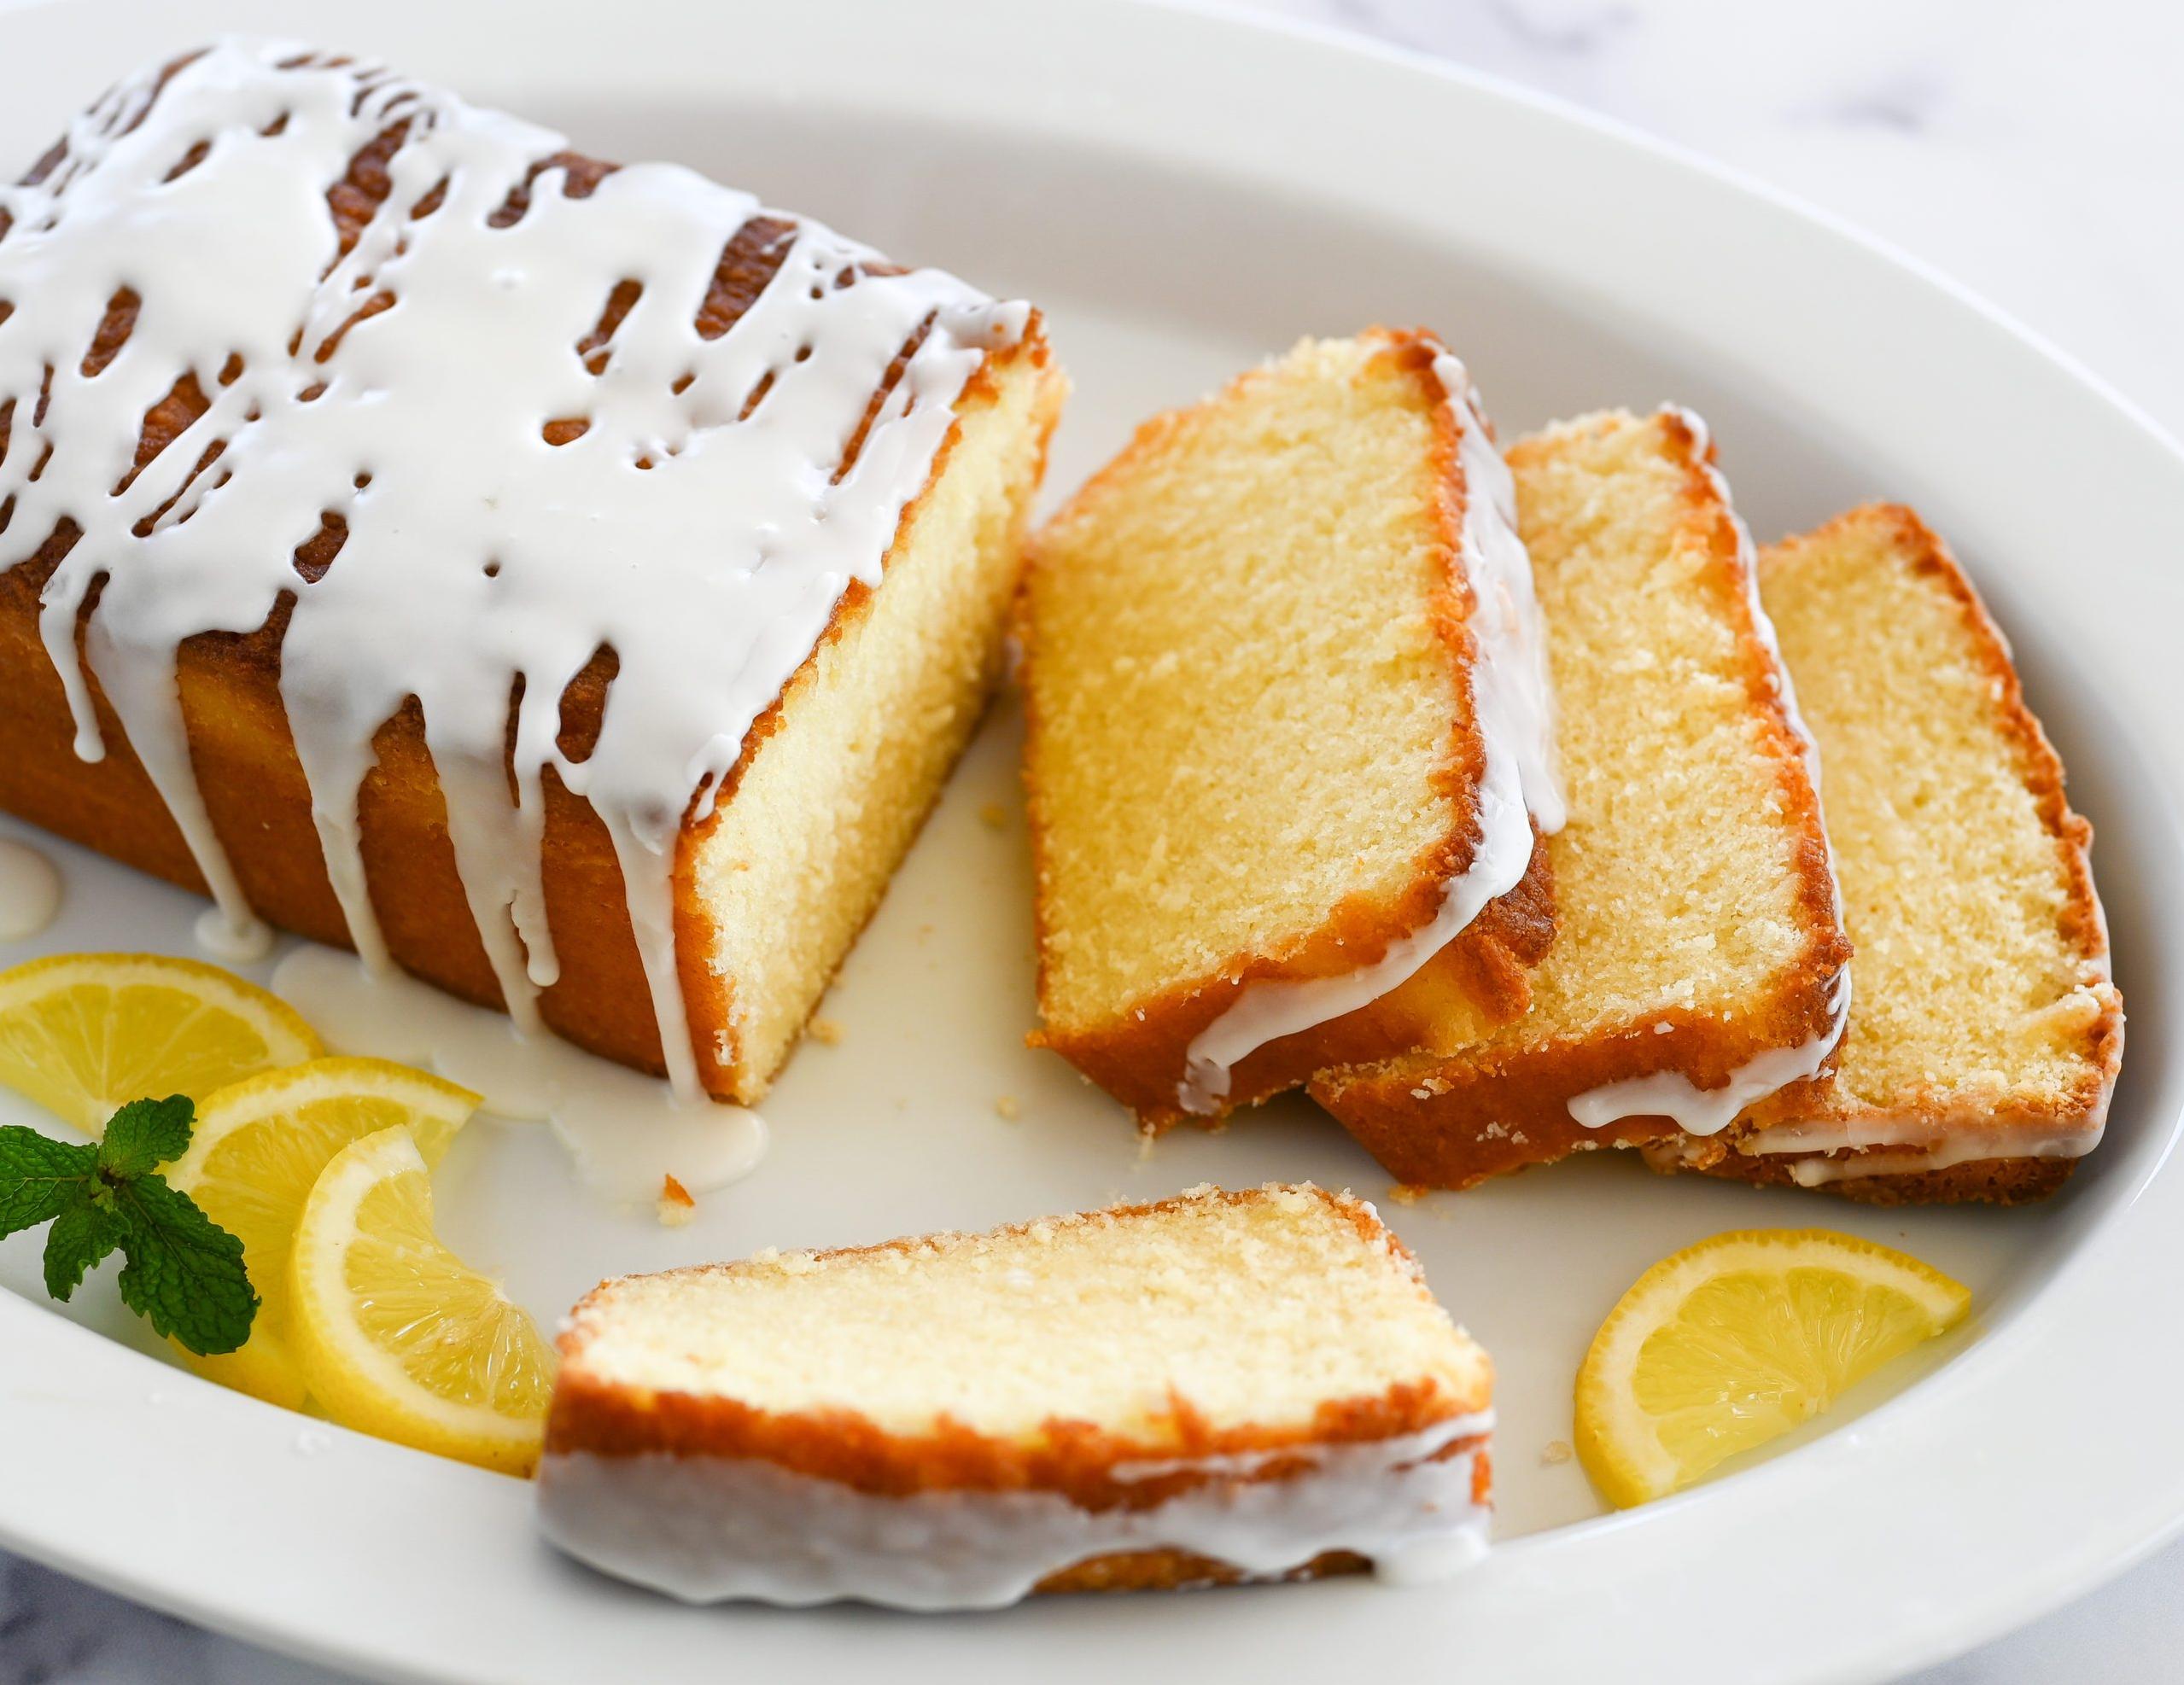  Brighten up your day with this zesty cake.